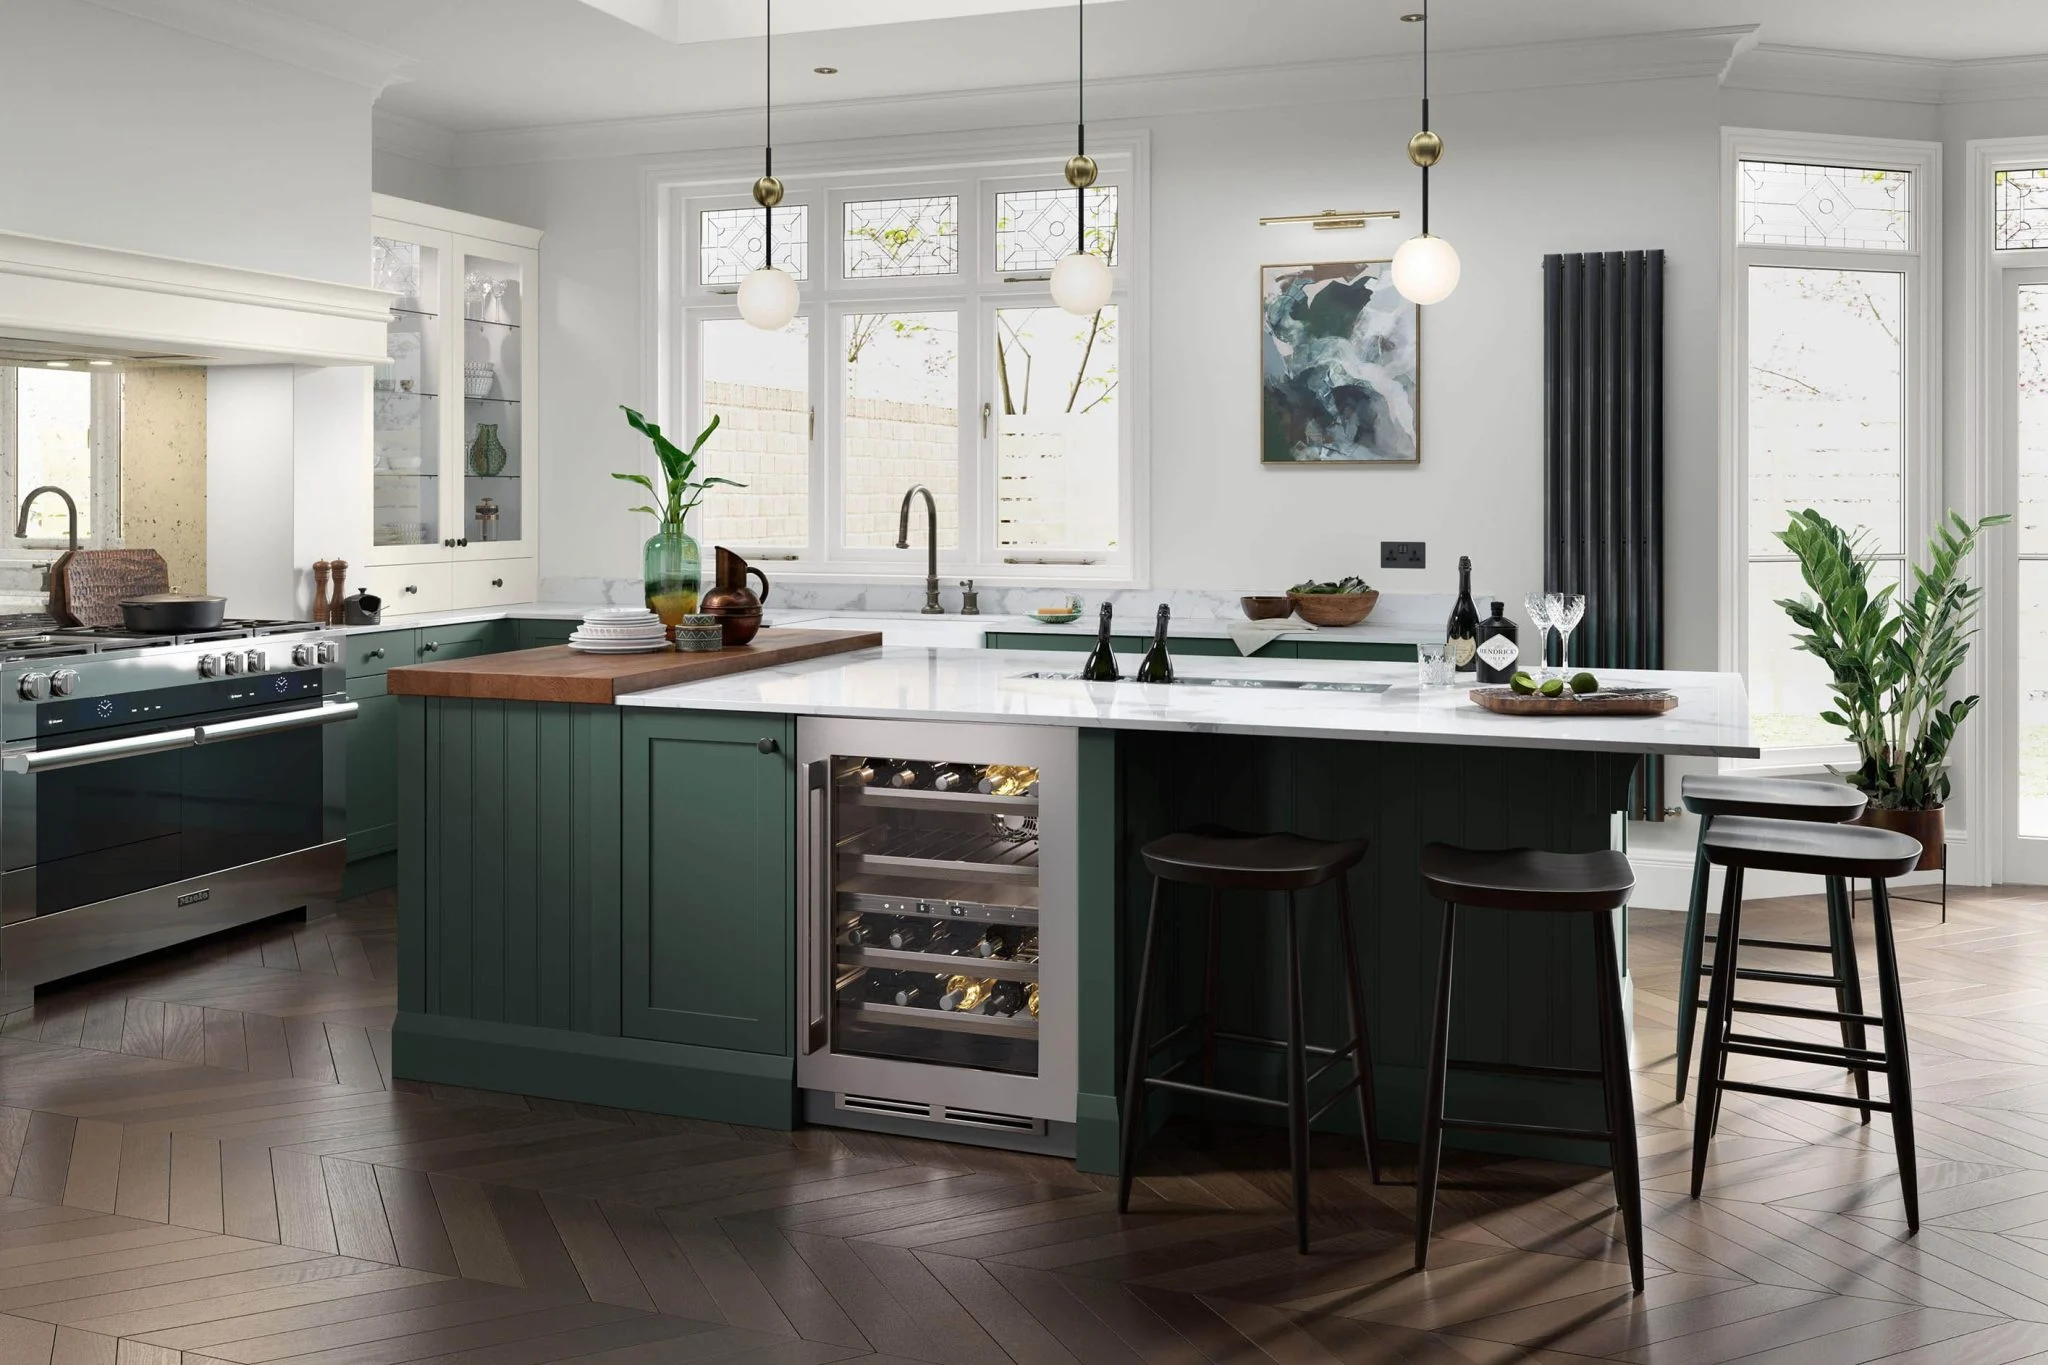 clifden-heritage-green-porcelain-classic-traditional-kitchen-uform-2048x1365